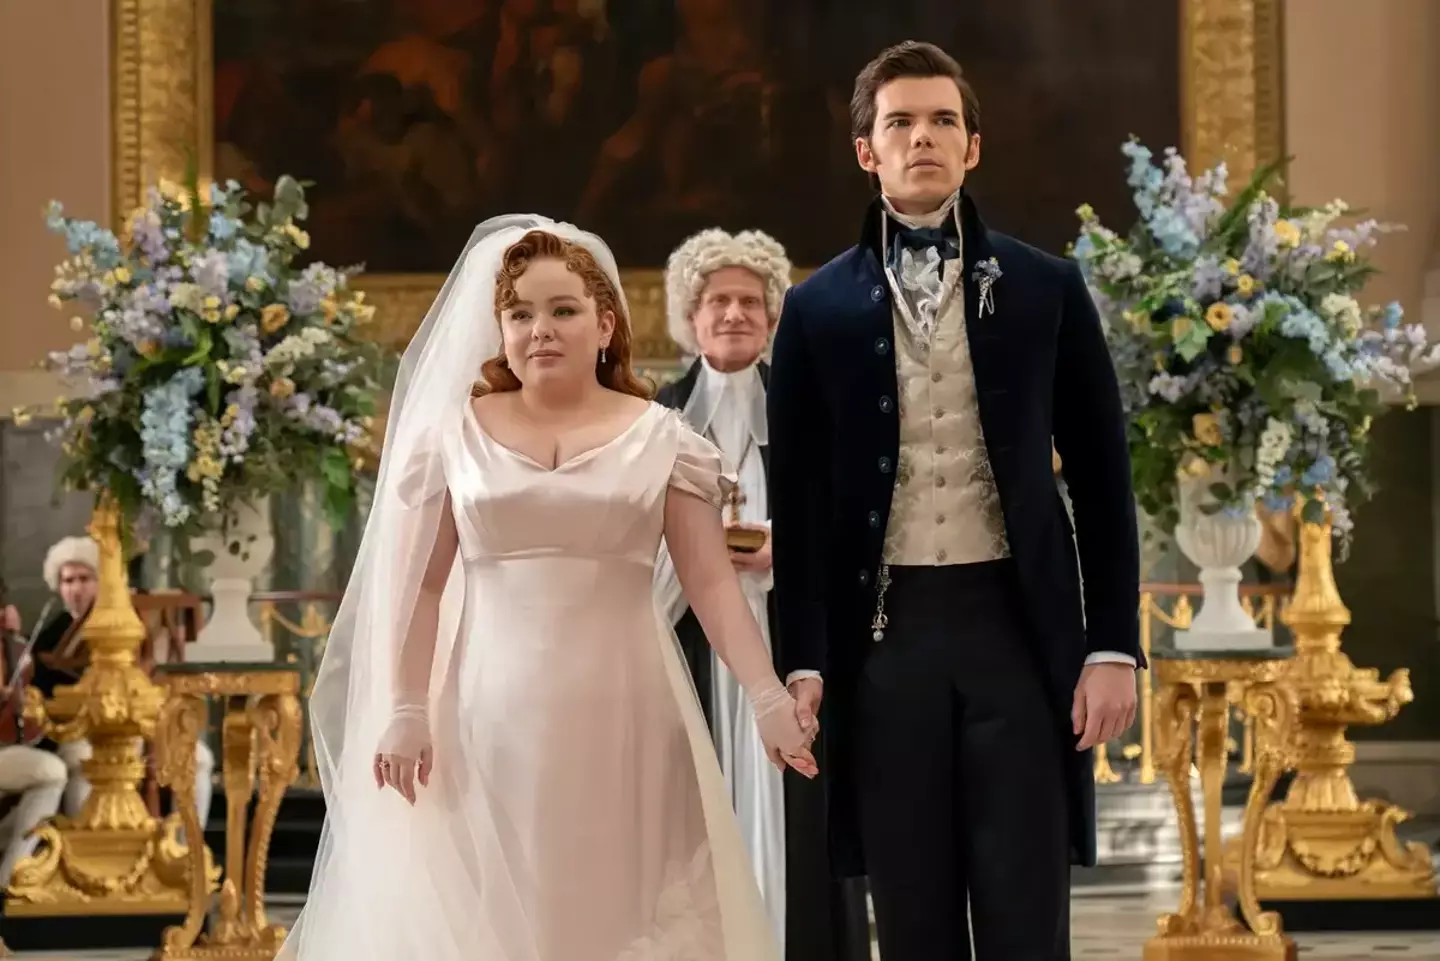 The colour scheme for Penelope and Colin's wedding in Bridgerton was selected deliberately. (Netflix)